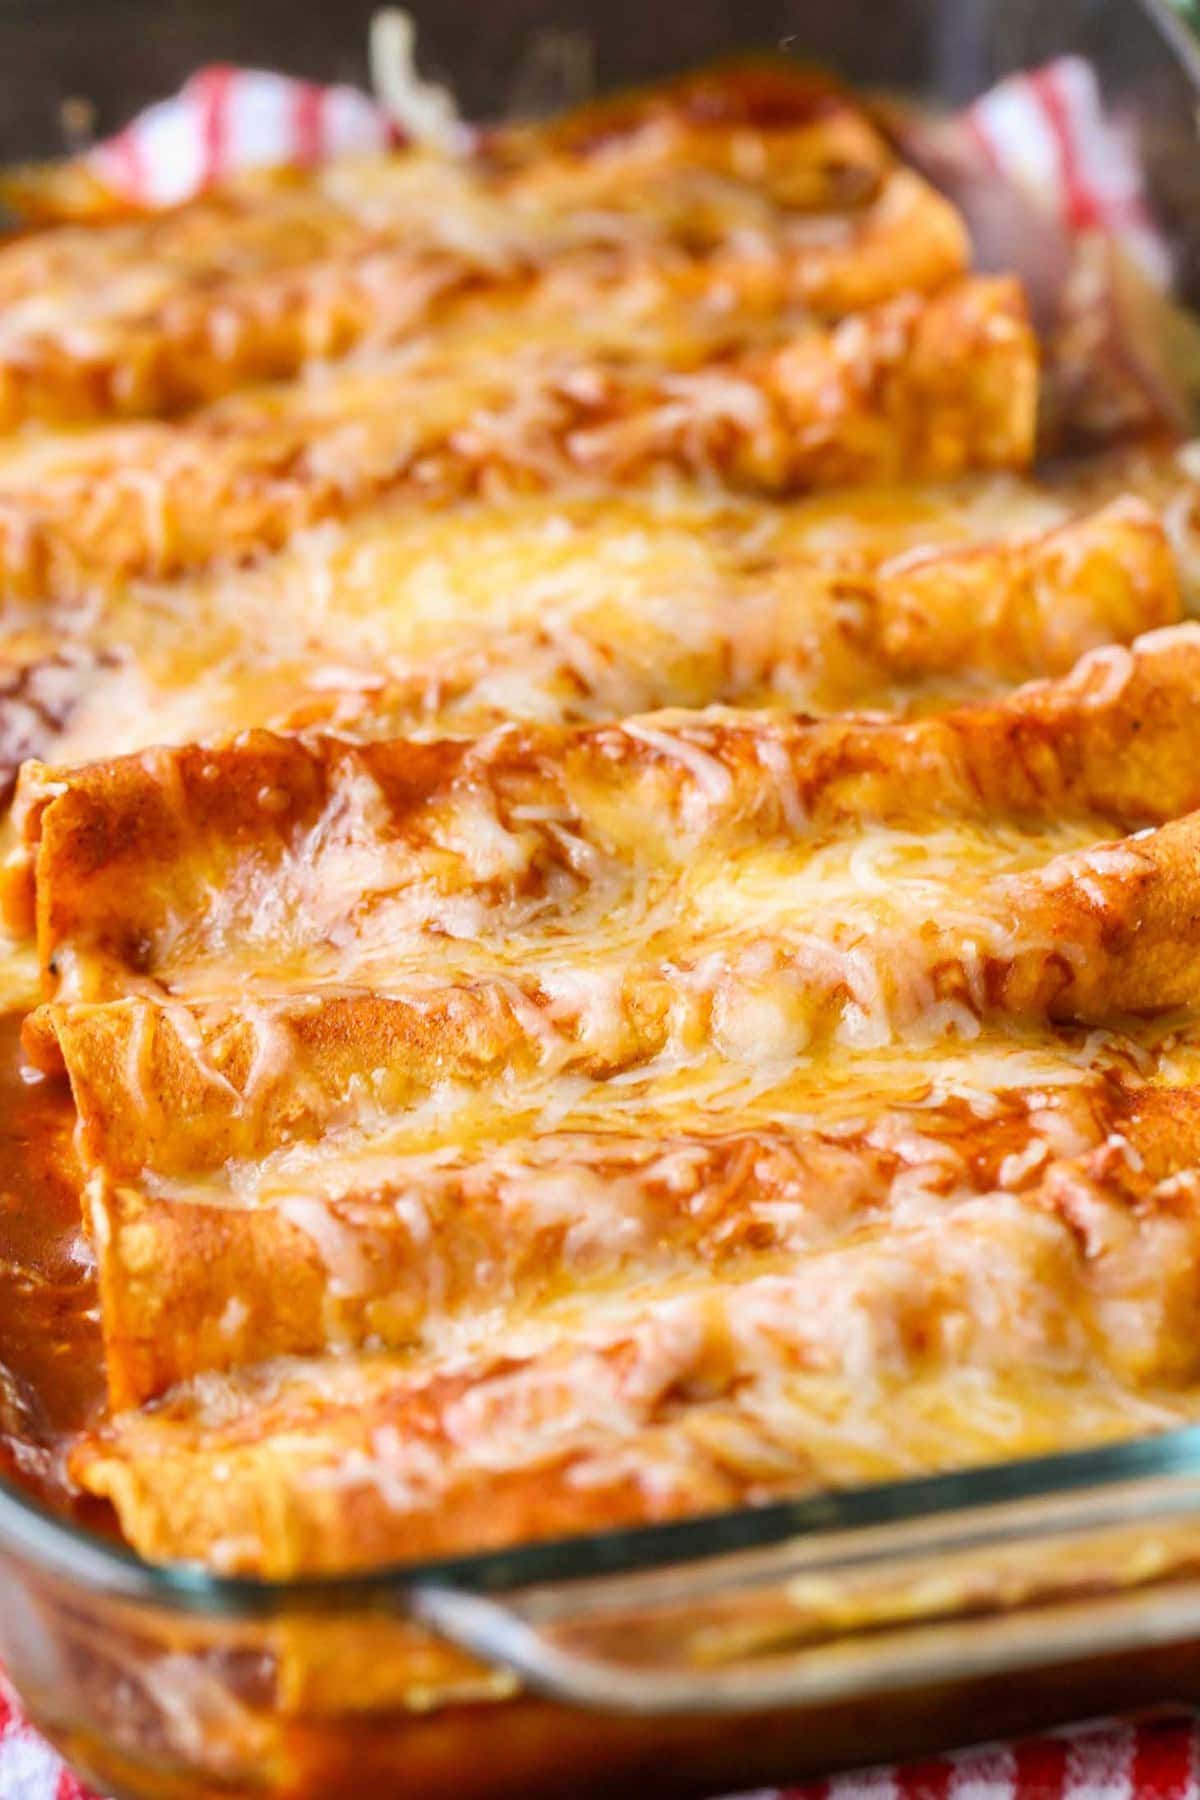 Cheese Enchiladas topped with red sauce and cheese in a glass baking dish